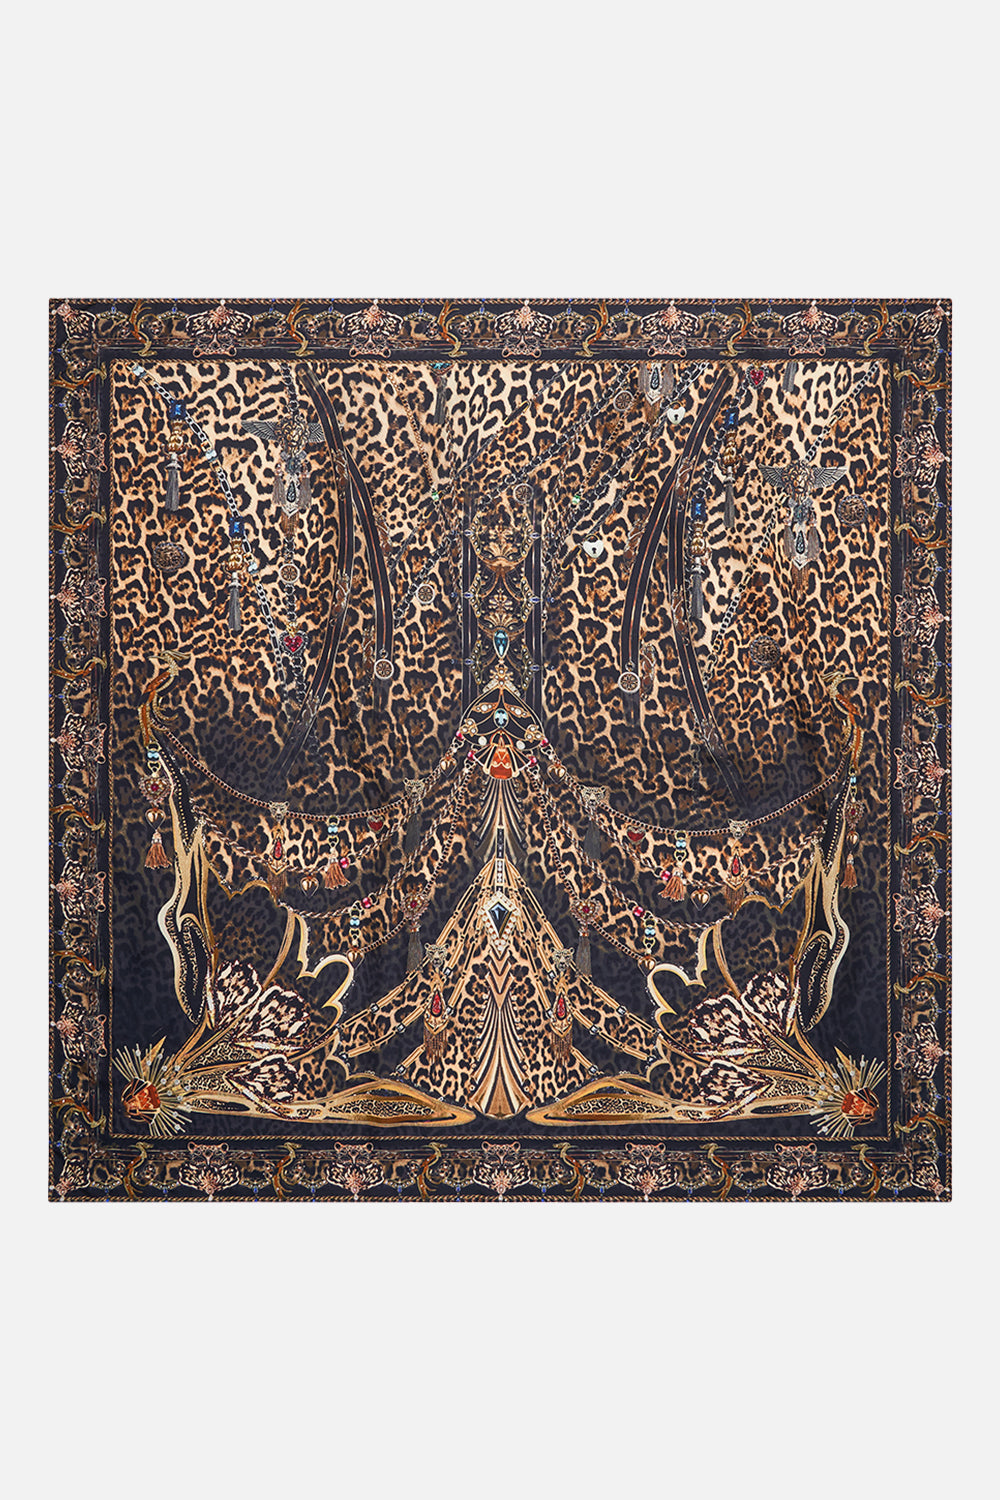 CAMILLA leopard large square scarf in Amsterglam